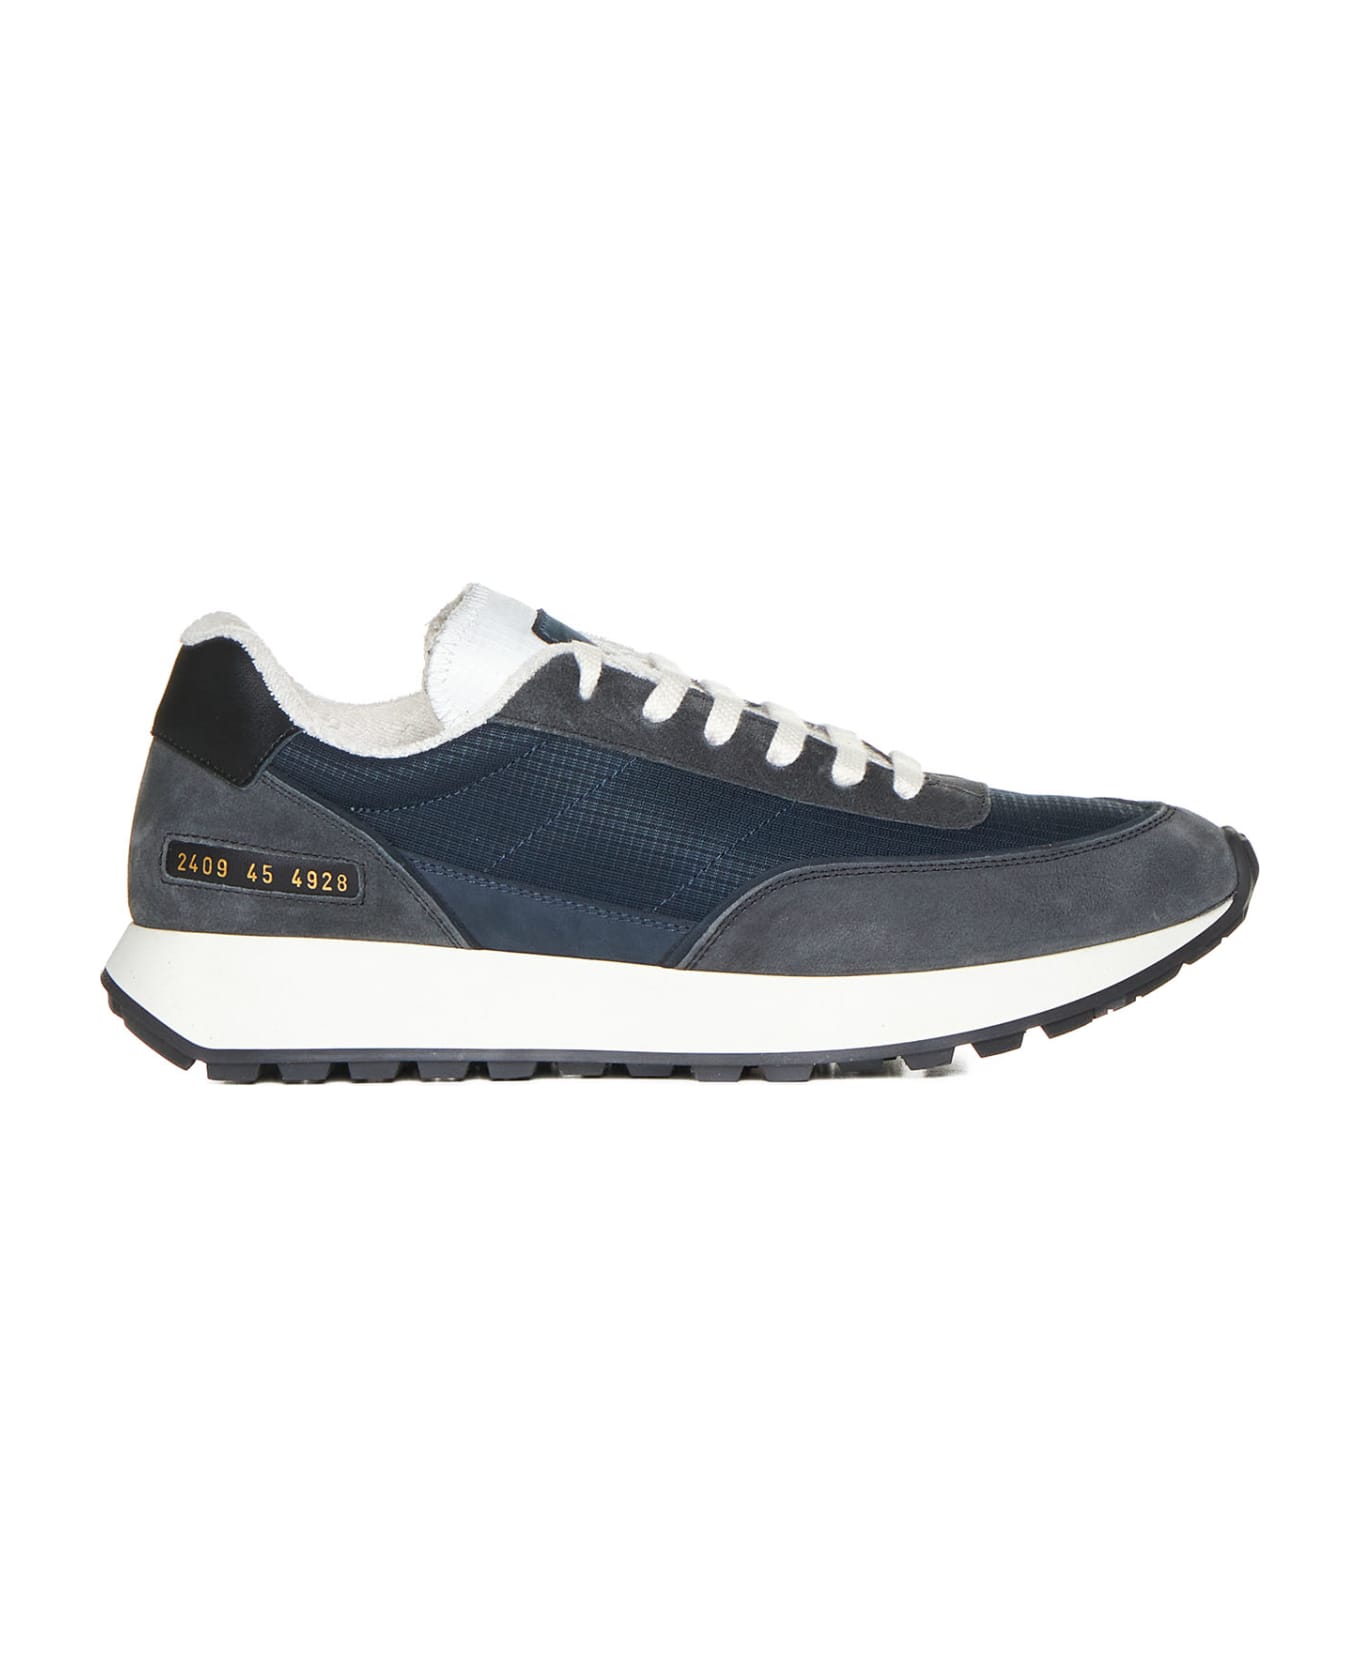 Common Projects Sneakers - Navy